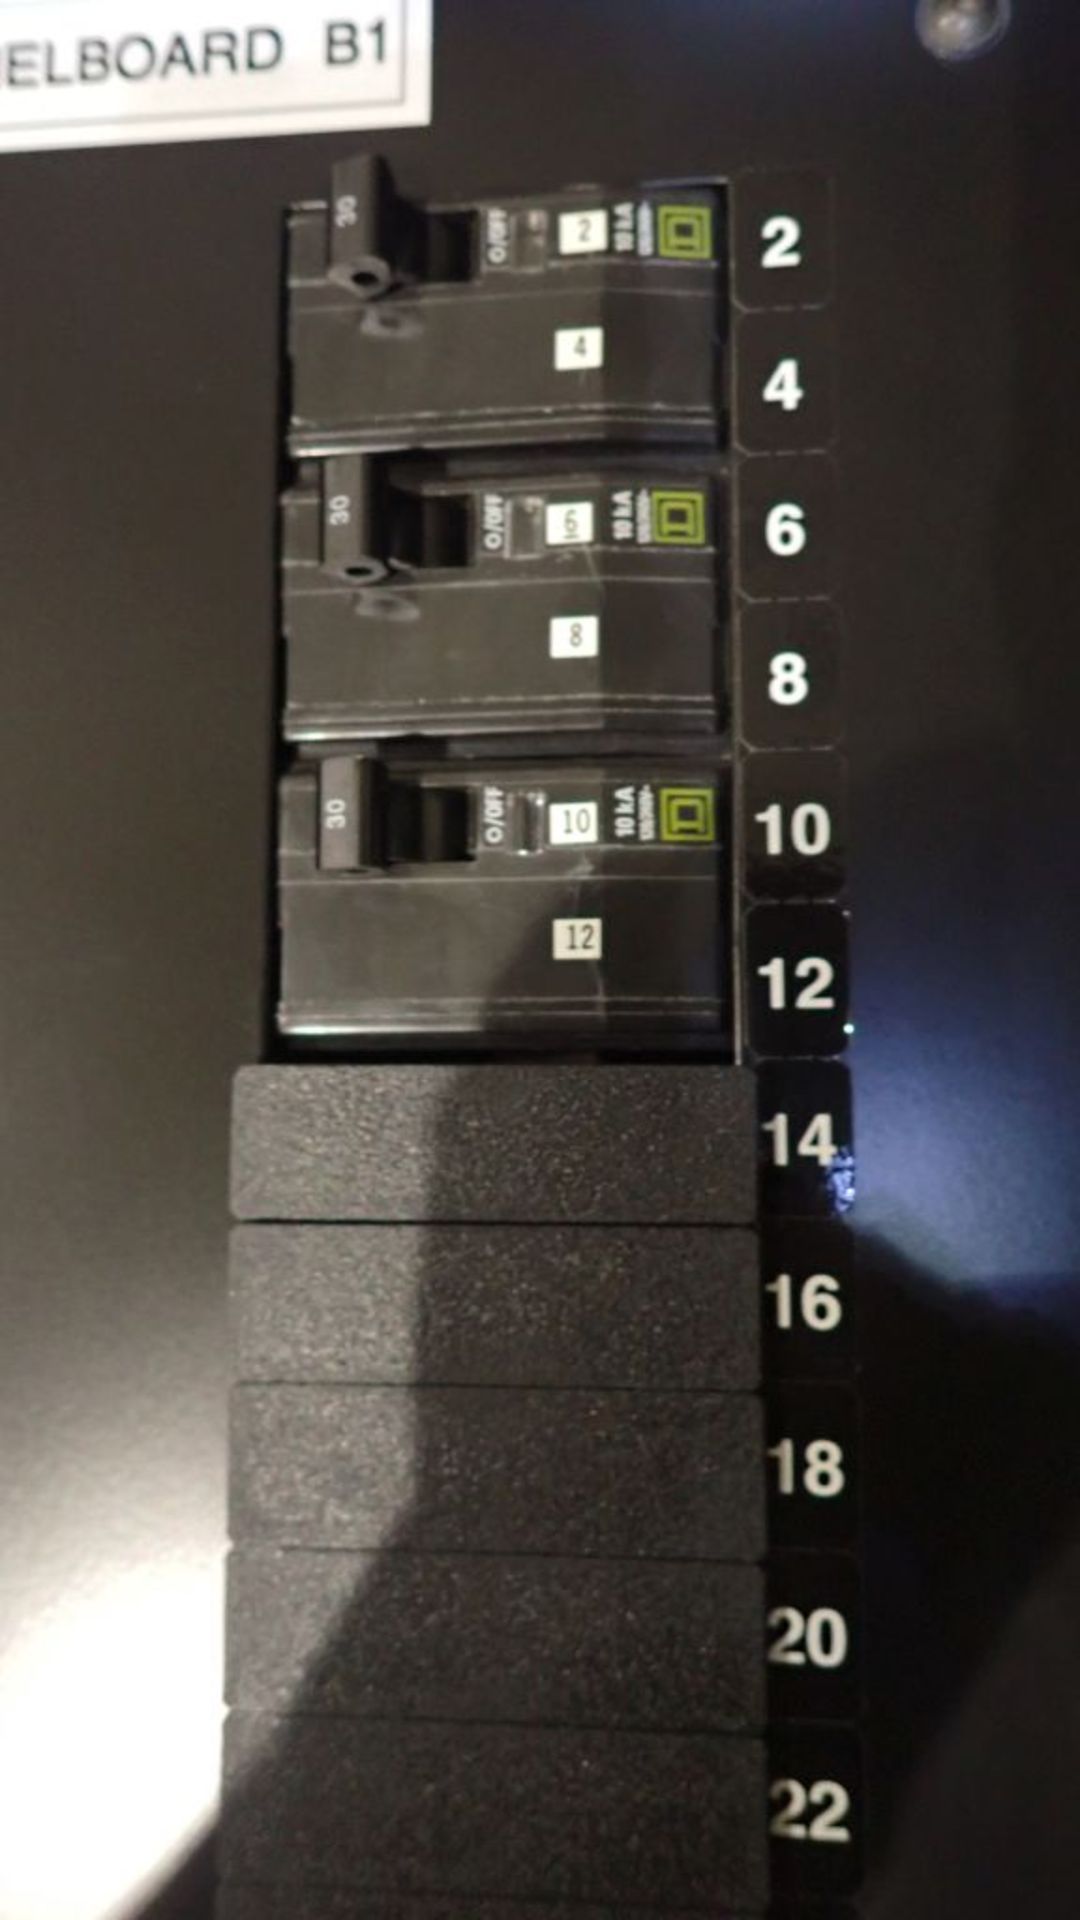 Onyx Power Rack Panelboard | Part No. 98-112-00-00; System 2; Input: 208/120 VAC; 4-Wire Plus Ground - Image 6 of 21